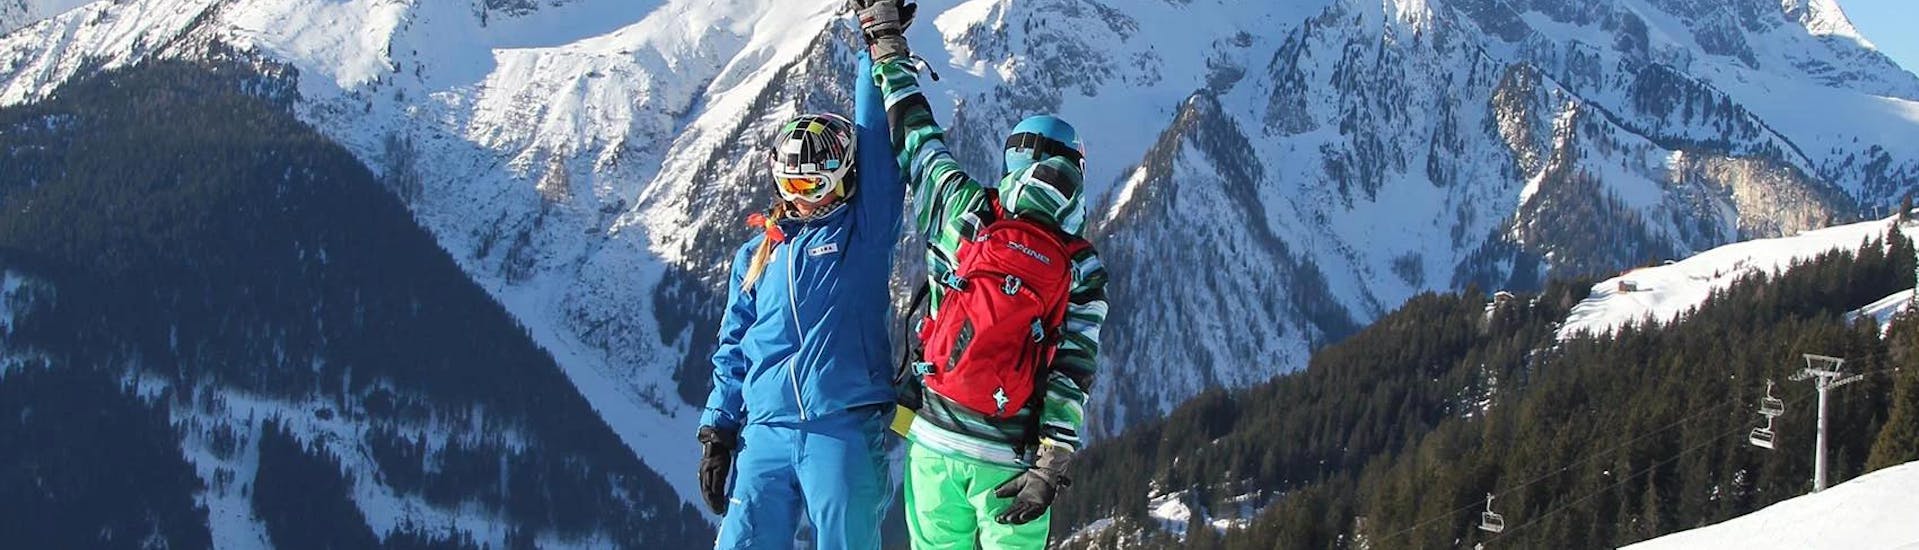 A snowboard instructor high-fives her student during the private snowboarding lessons with Skischule Habeler Mayrhofen.